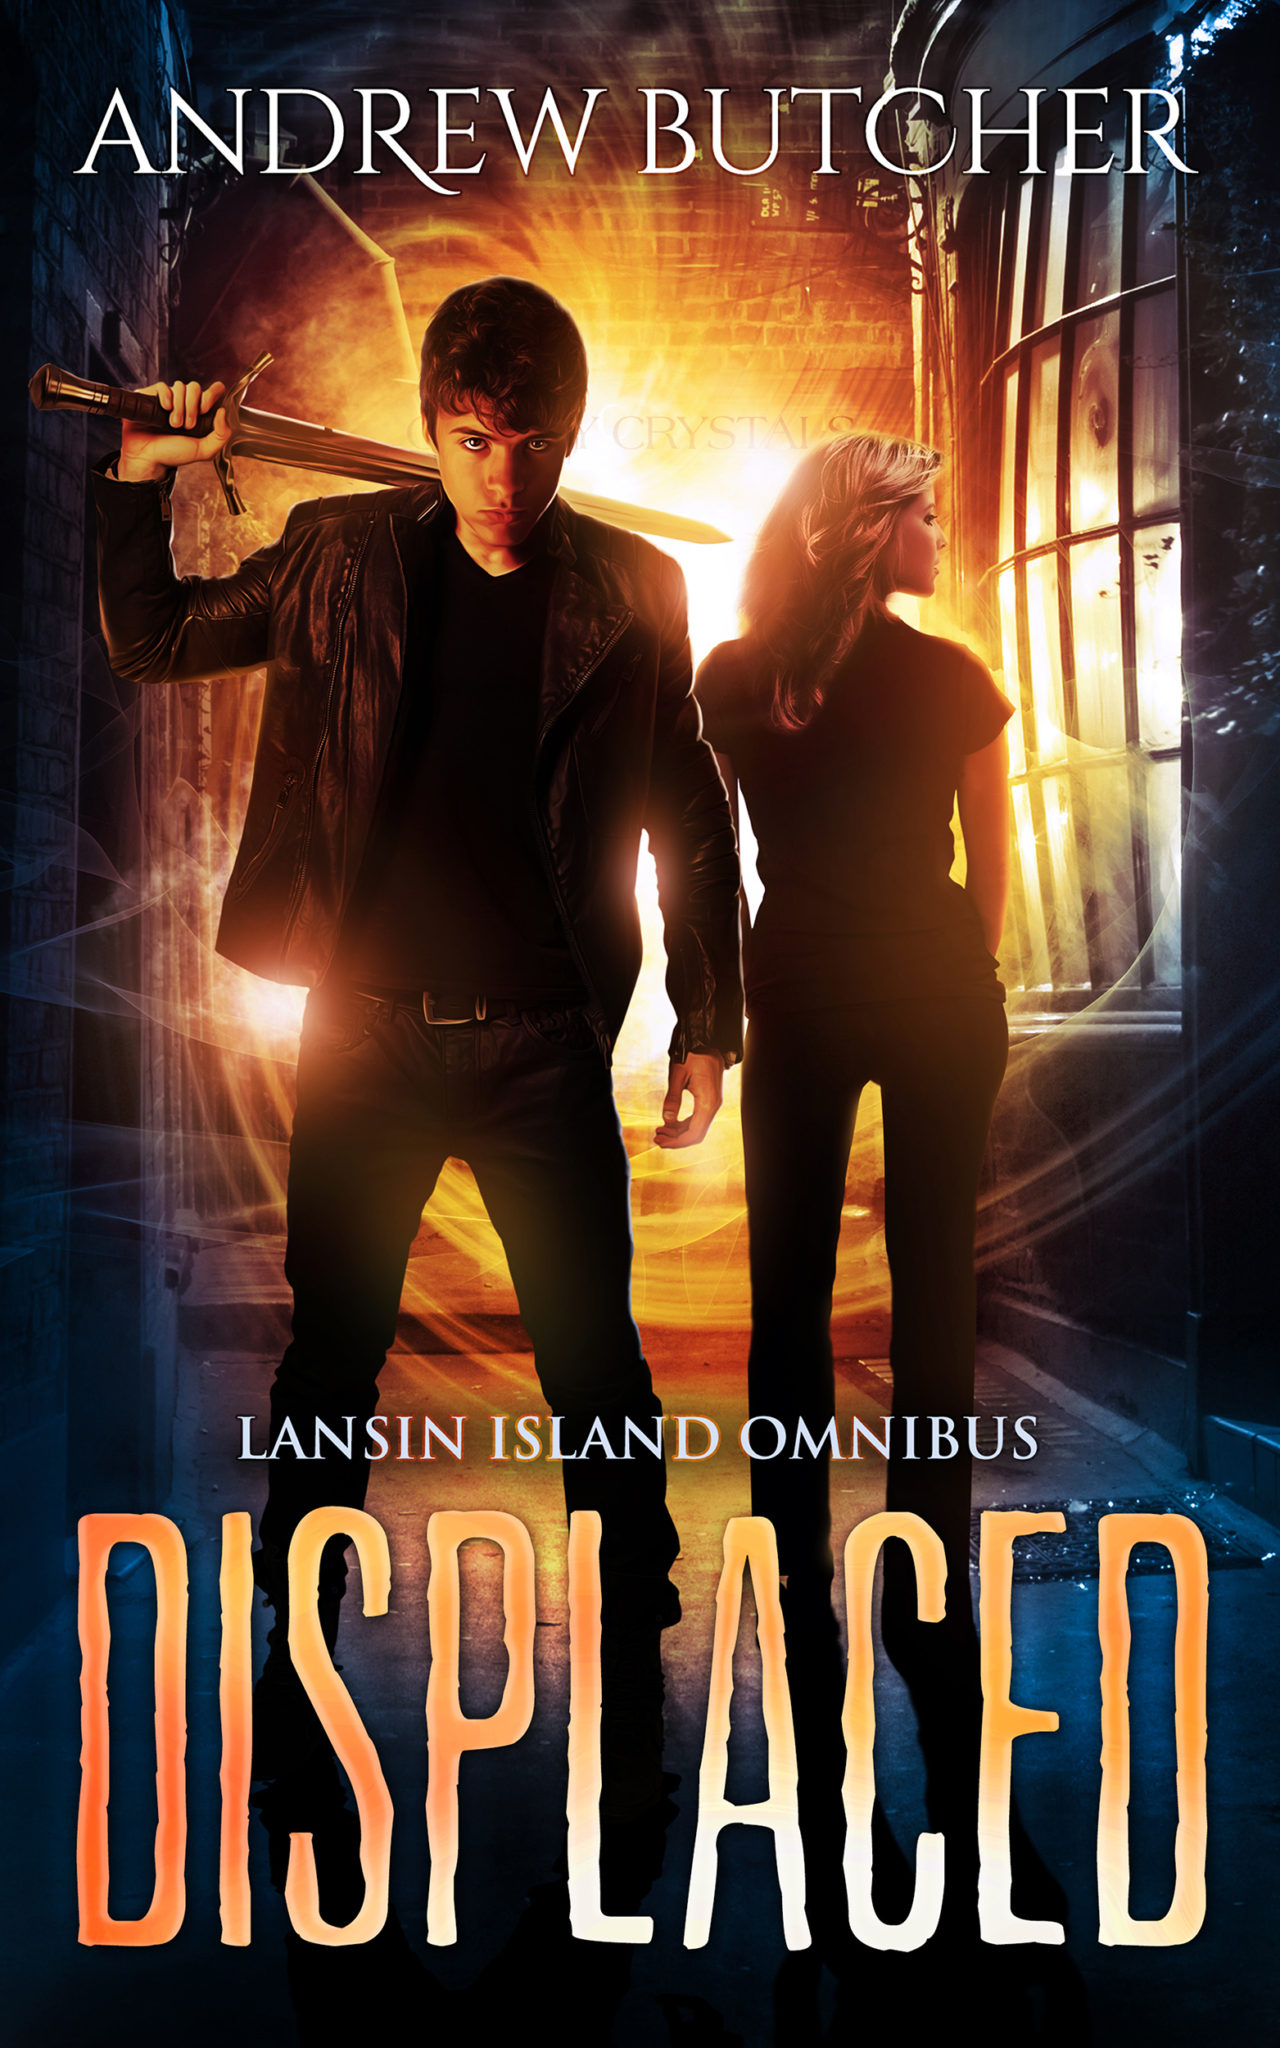 FREE: Displaced: Psychic Visions and Ghosts Books 1-3 by Andrew Butcher